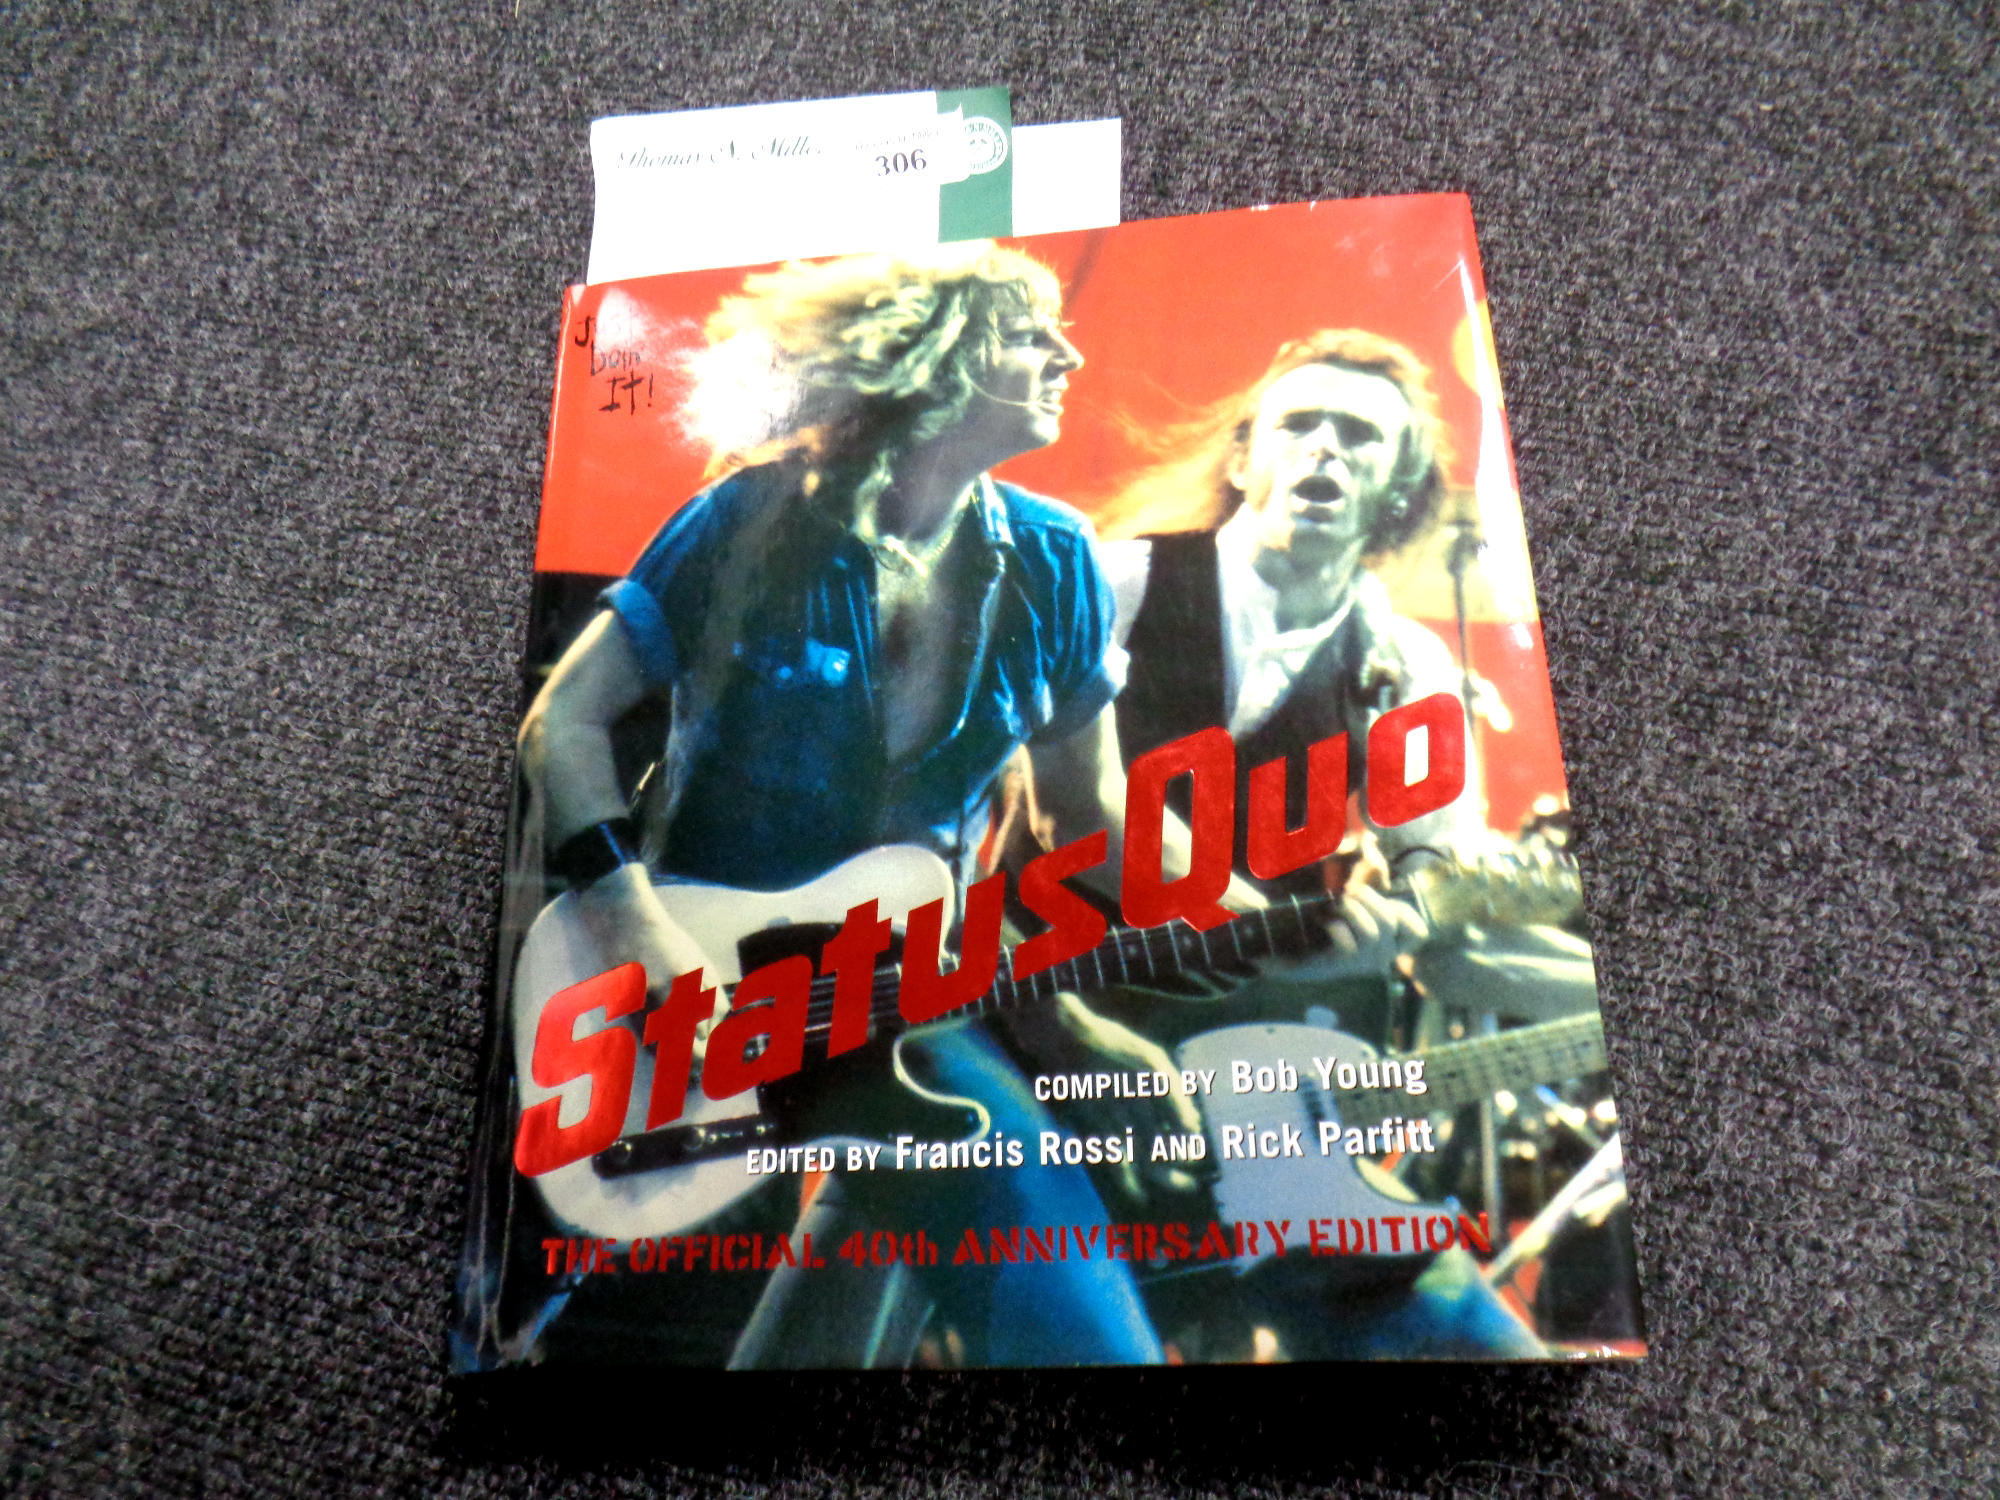 Status Quo : Just Doin' It, 40th anniversary edition, signed by Francis Rossi and Rick Parfitt.